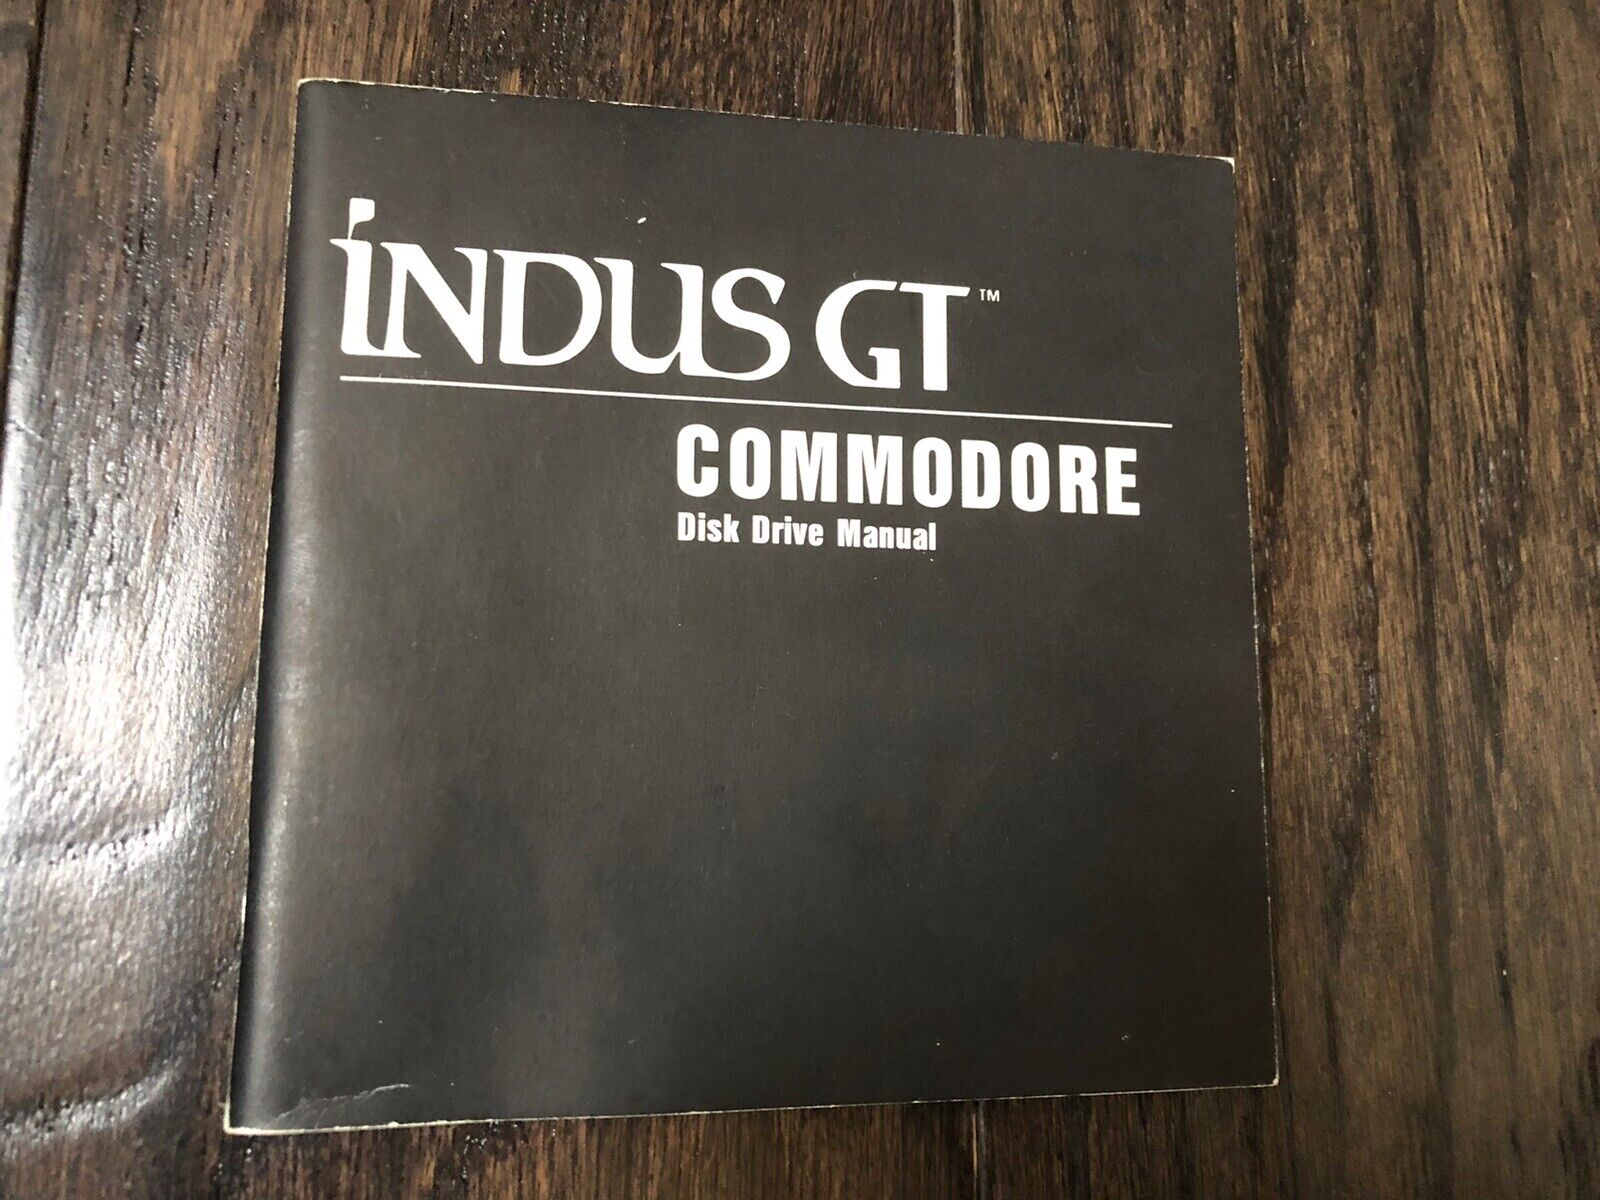 Indus GT Disk Drive Manual for Commodore - RARE 1984